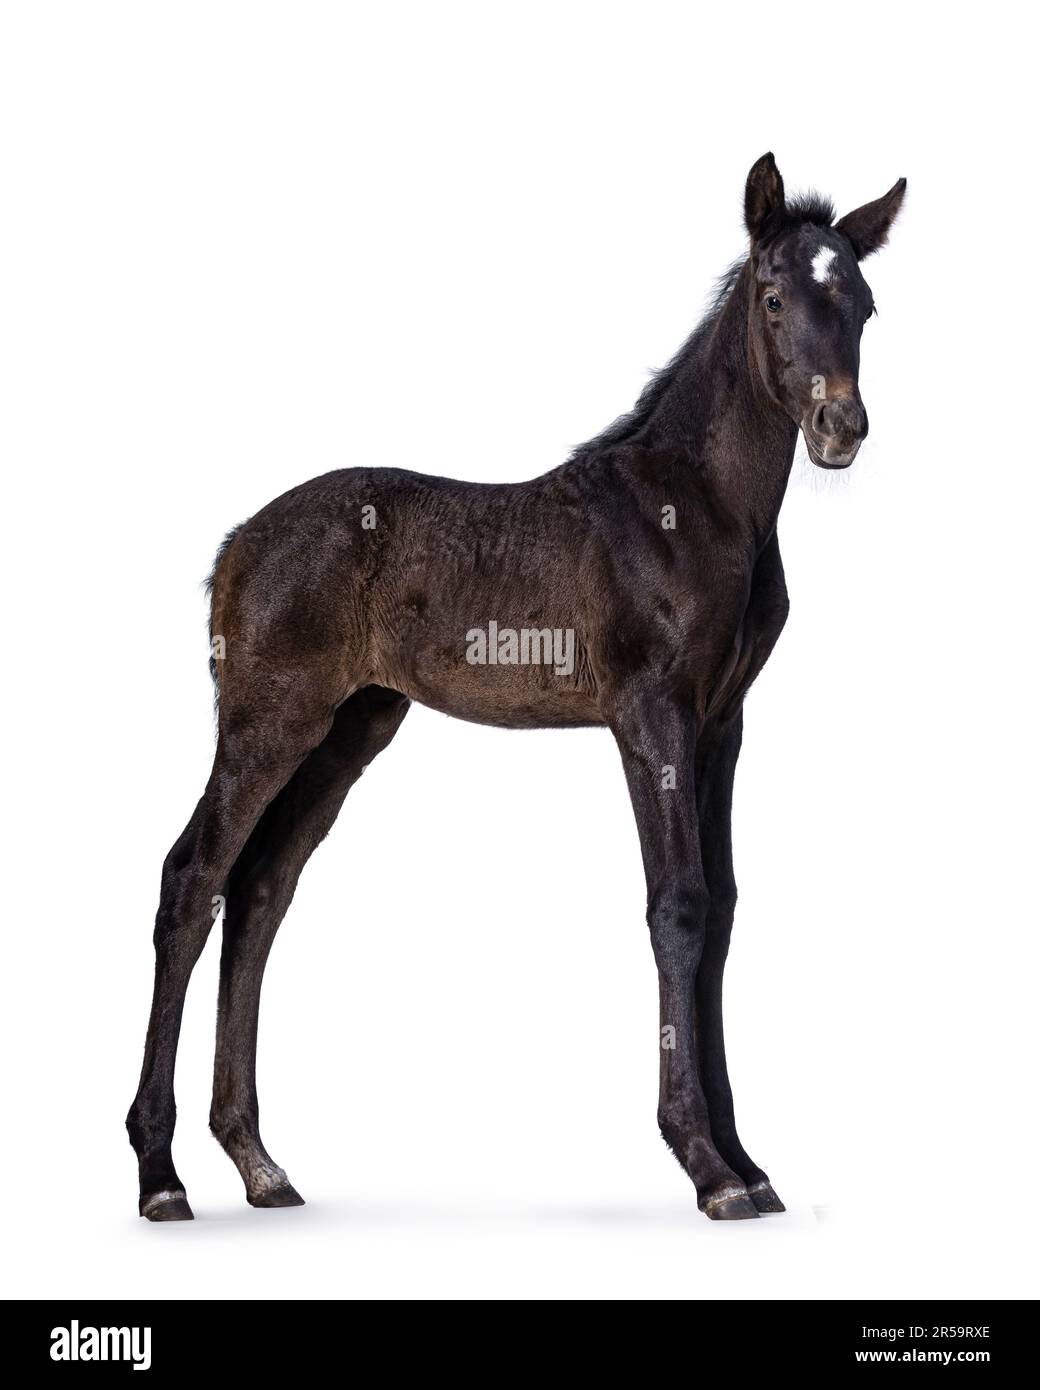 1 Month old dark brown Andalusian horse aka pura raza espanola, standing side ways. Looking towards camera. Isolated on a white background. Stock Photo